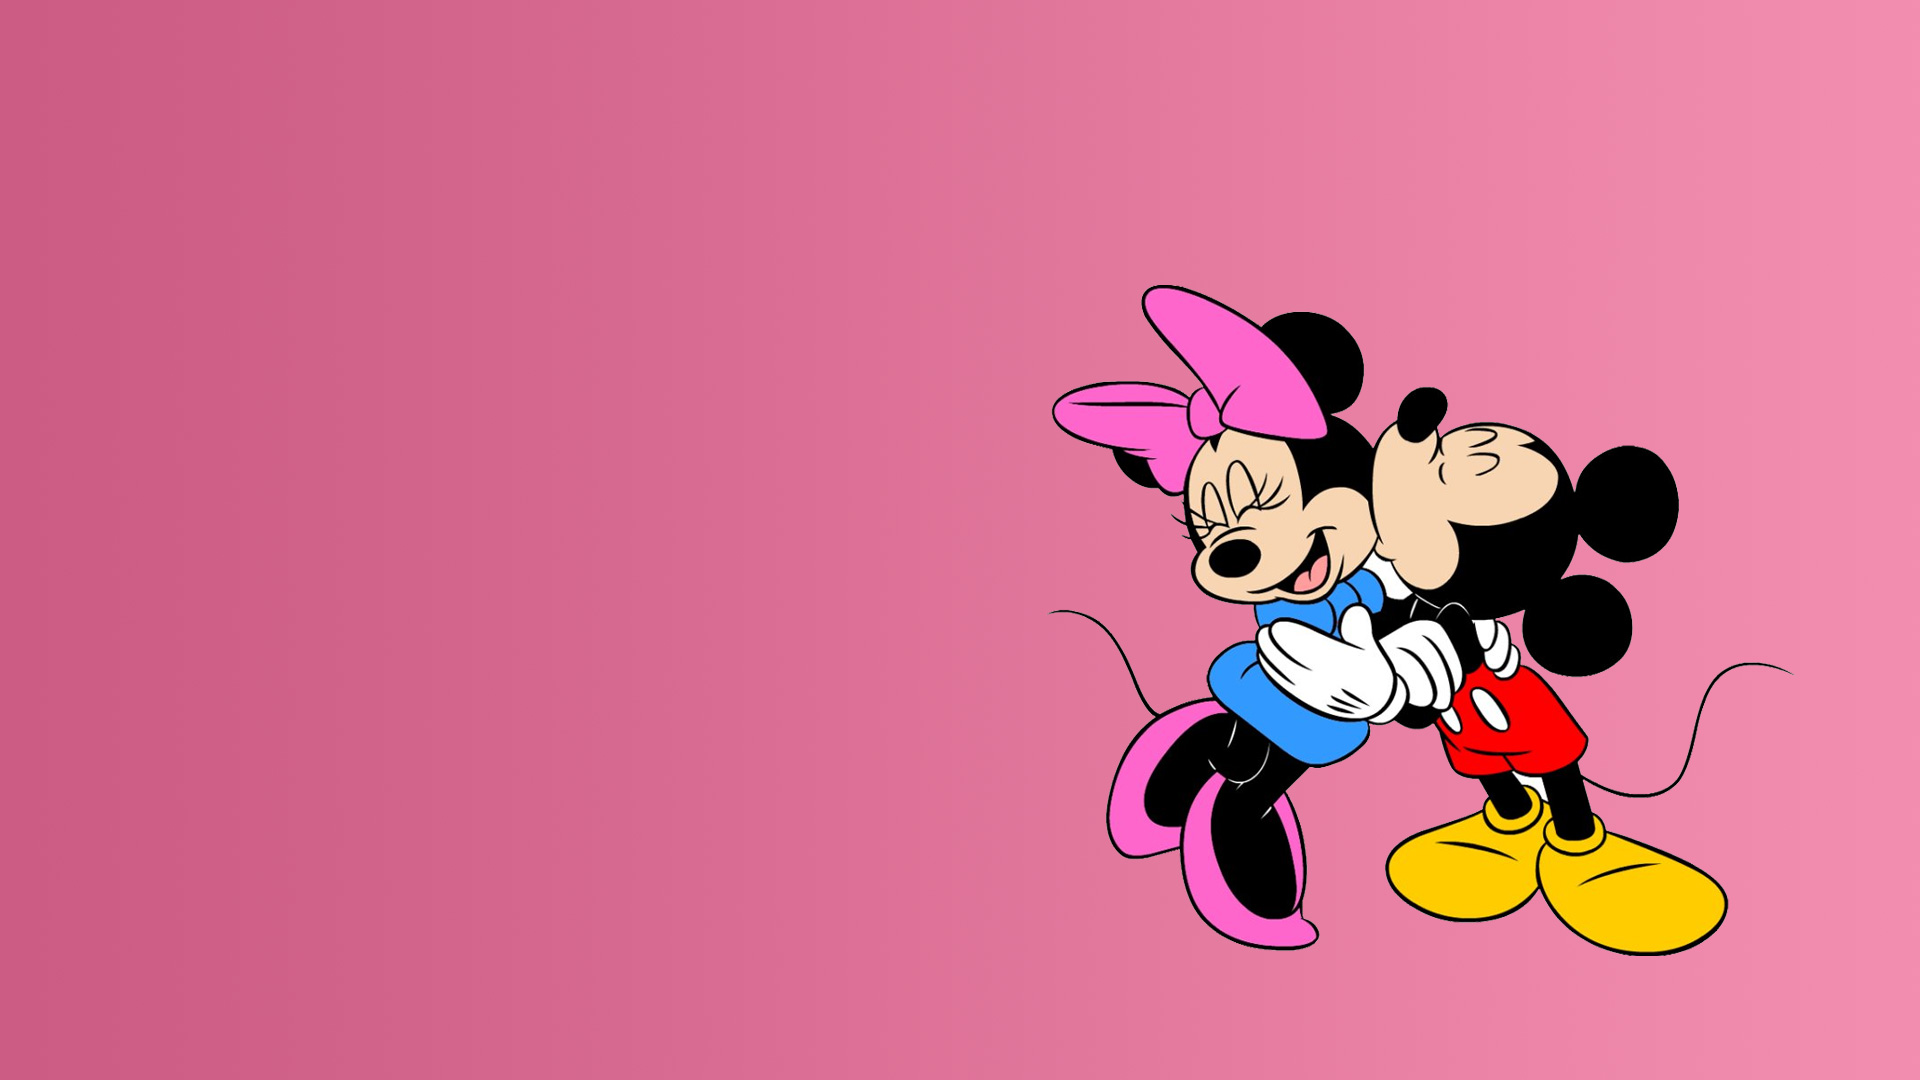 Gallery For Gt Vintage Mickey And Minnie Mouse Wallpaper